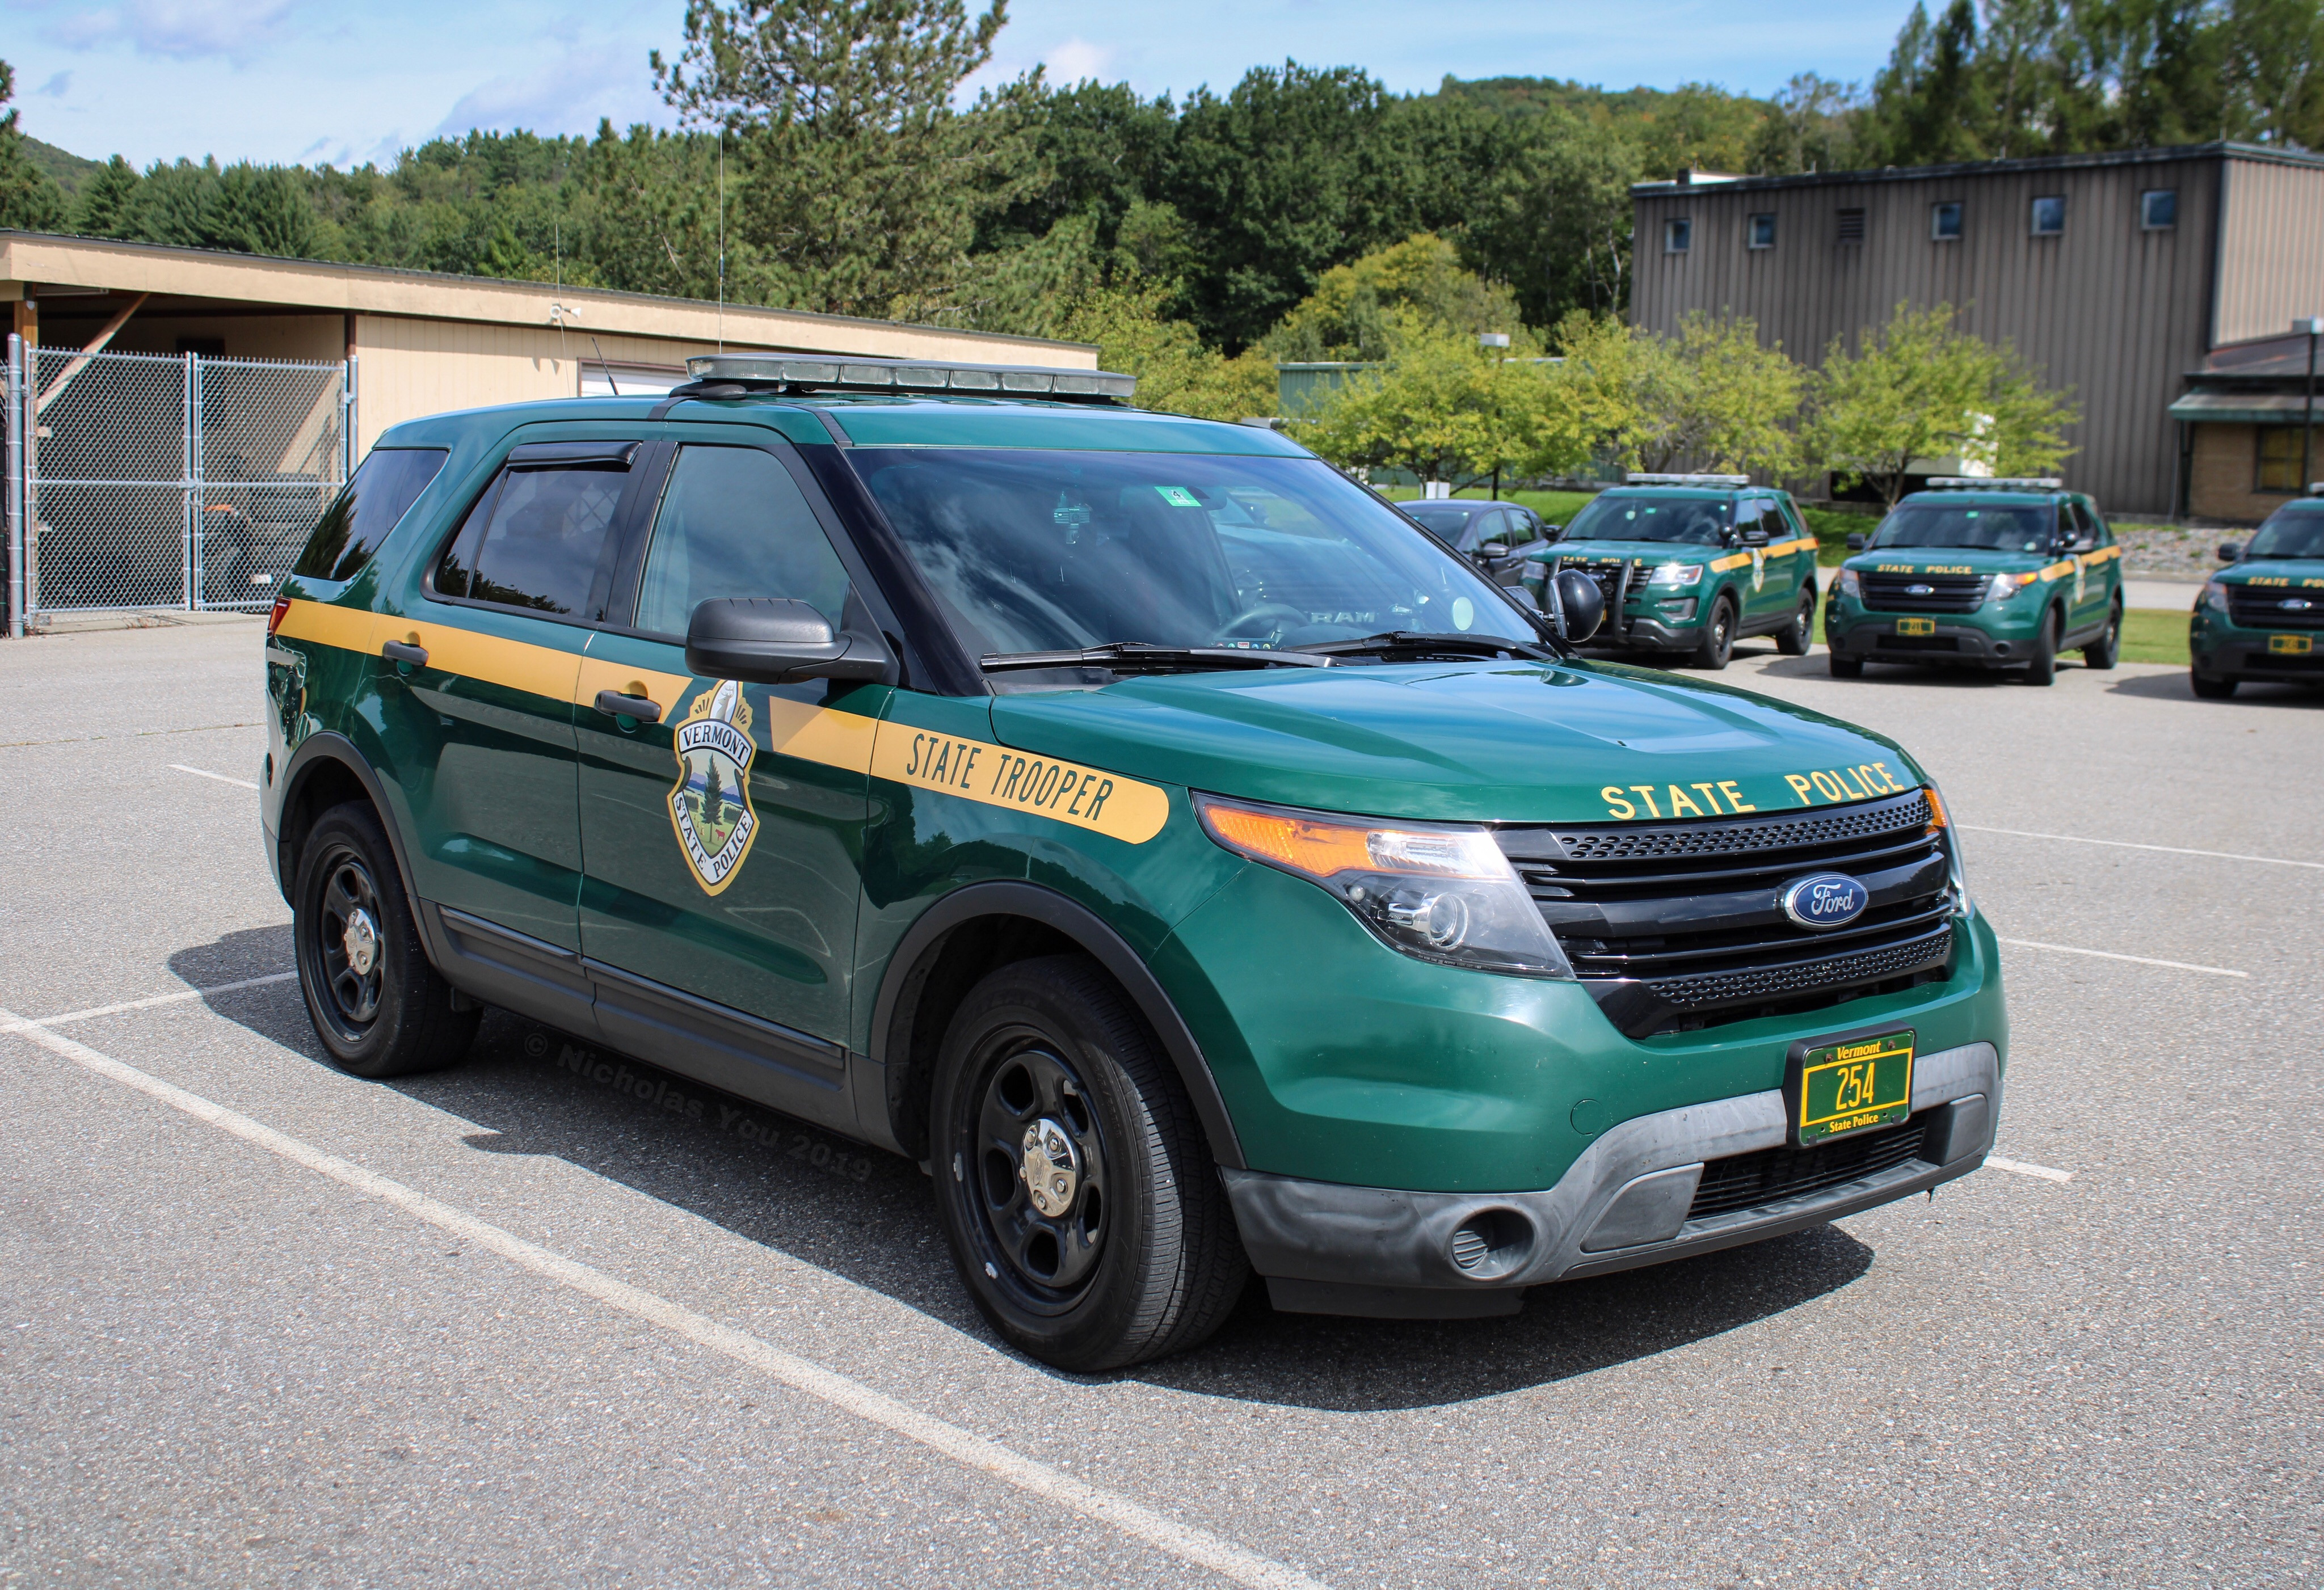 A photo  of Vermont State Police
            Cruiser 254, a 2013-2015 Ford Police Interceptor Utility             taken by Nicholas You